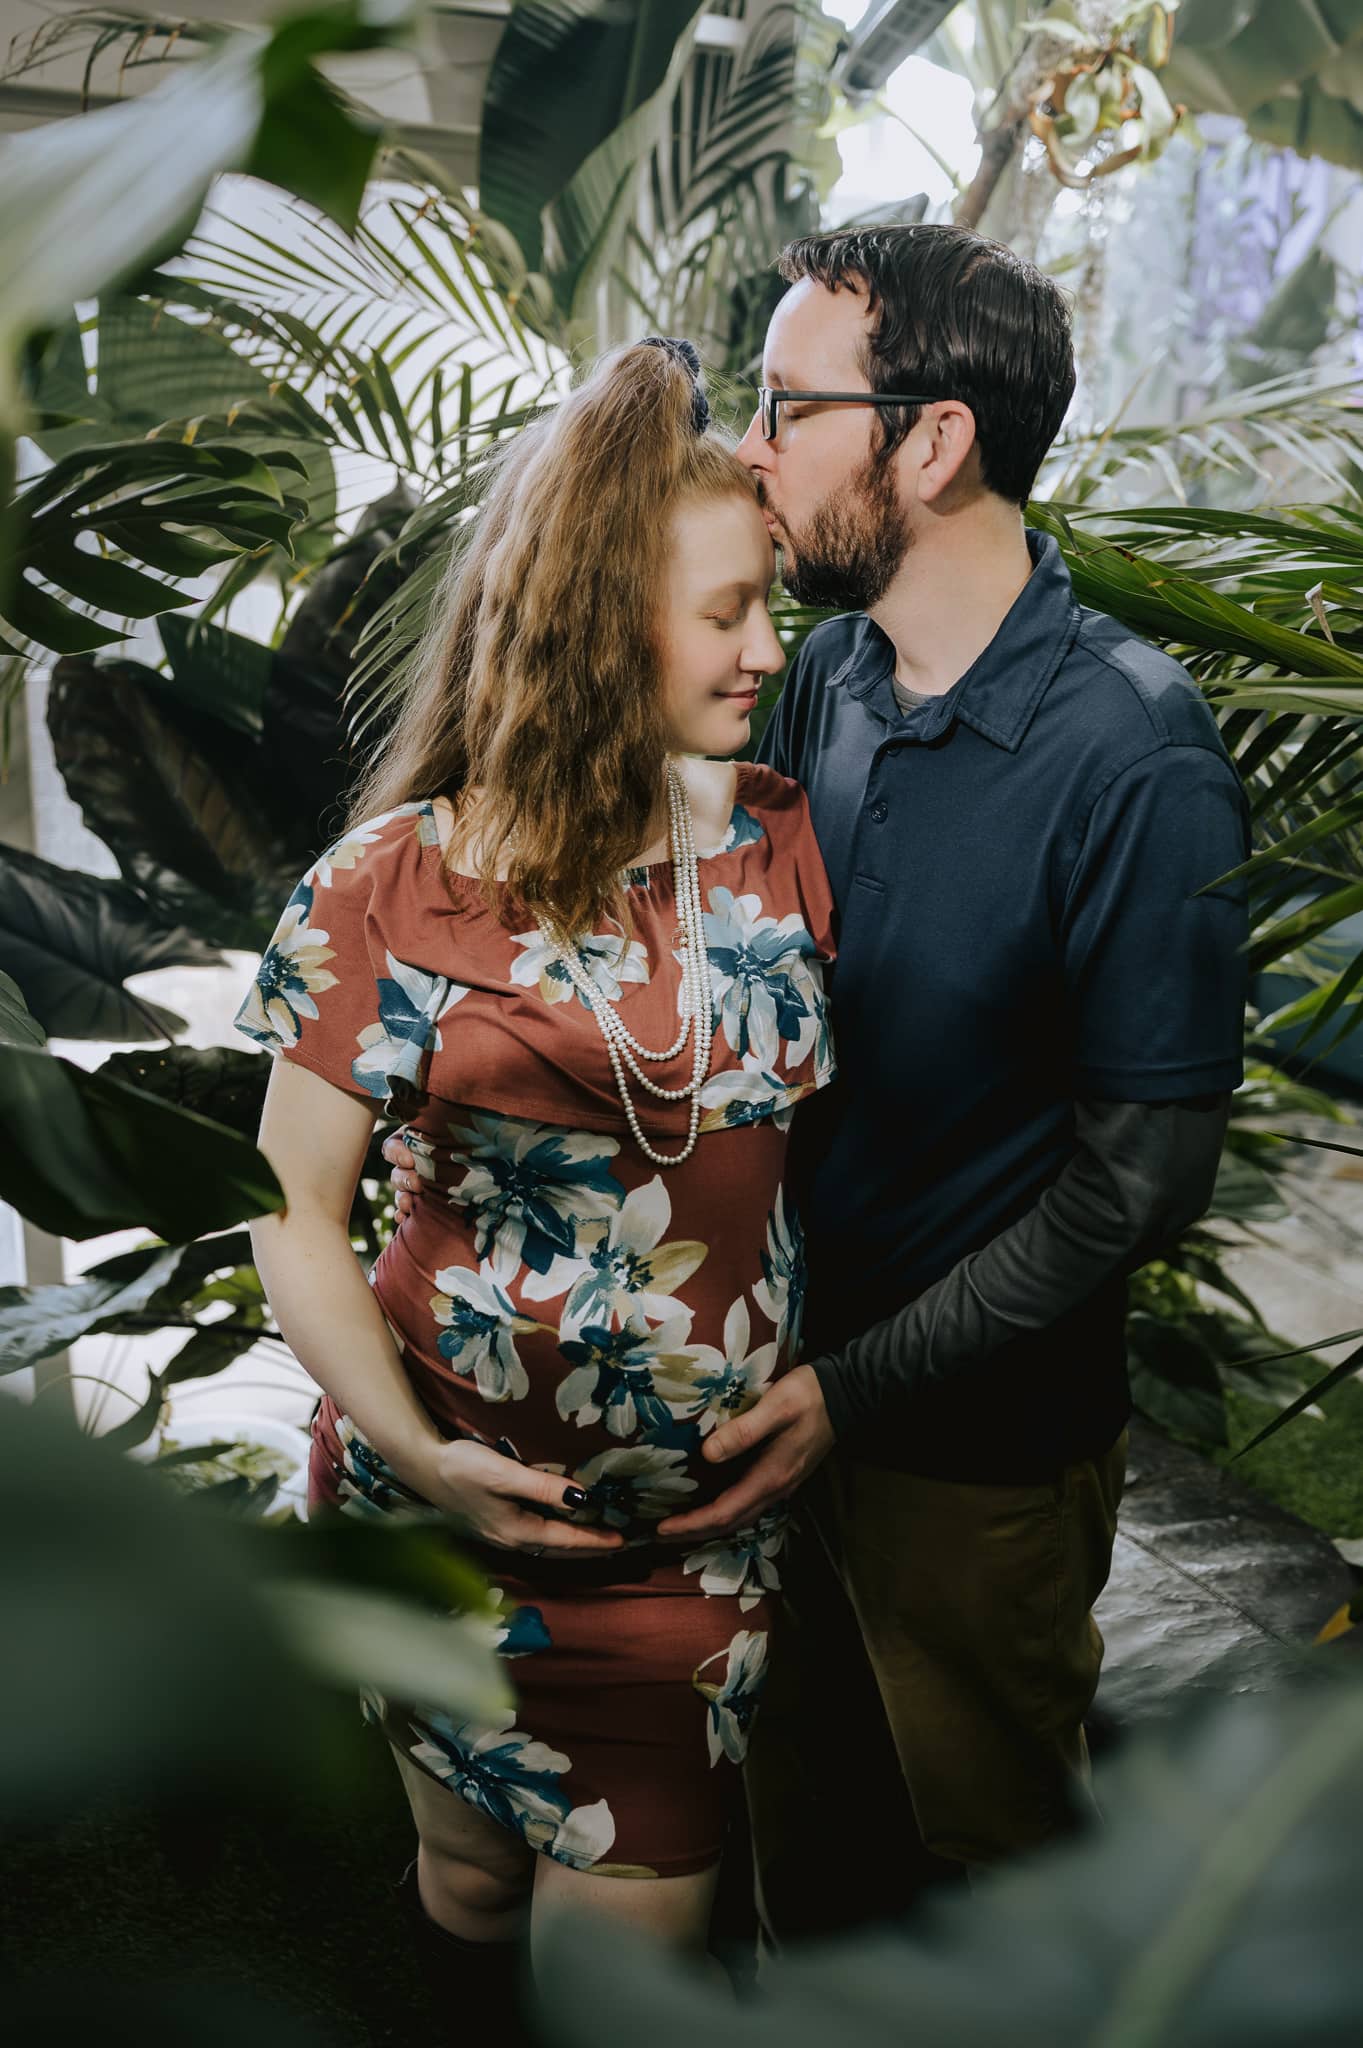 A husband kisses his expectant wife on the forehead during their unique jungle indoor maternity photo session.